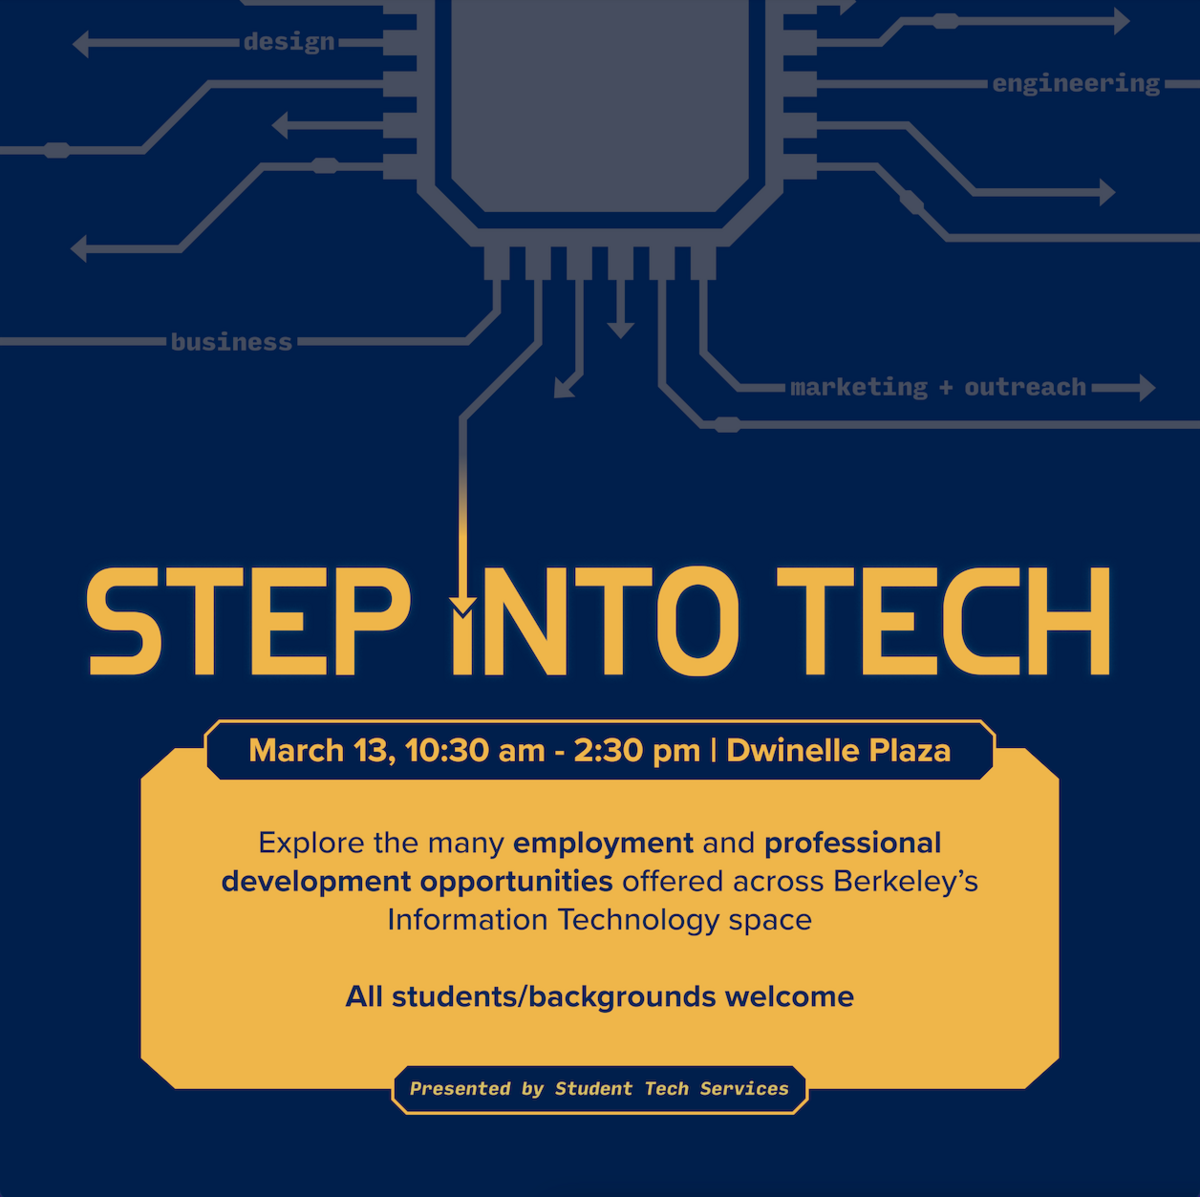 step into tech job fair at dwindle plaza on Wednesday march 13, 2024 from 10:30 a.m. to 2:30 p.m.